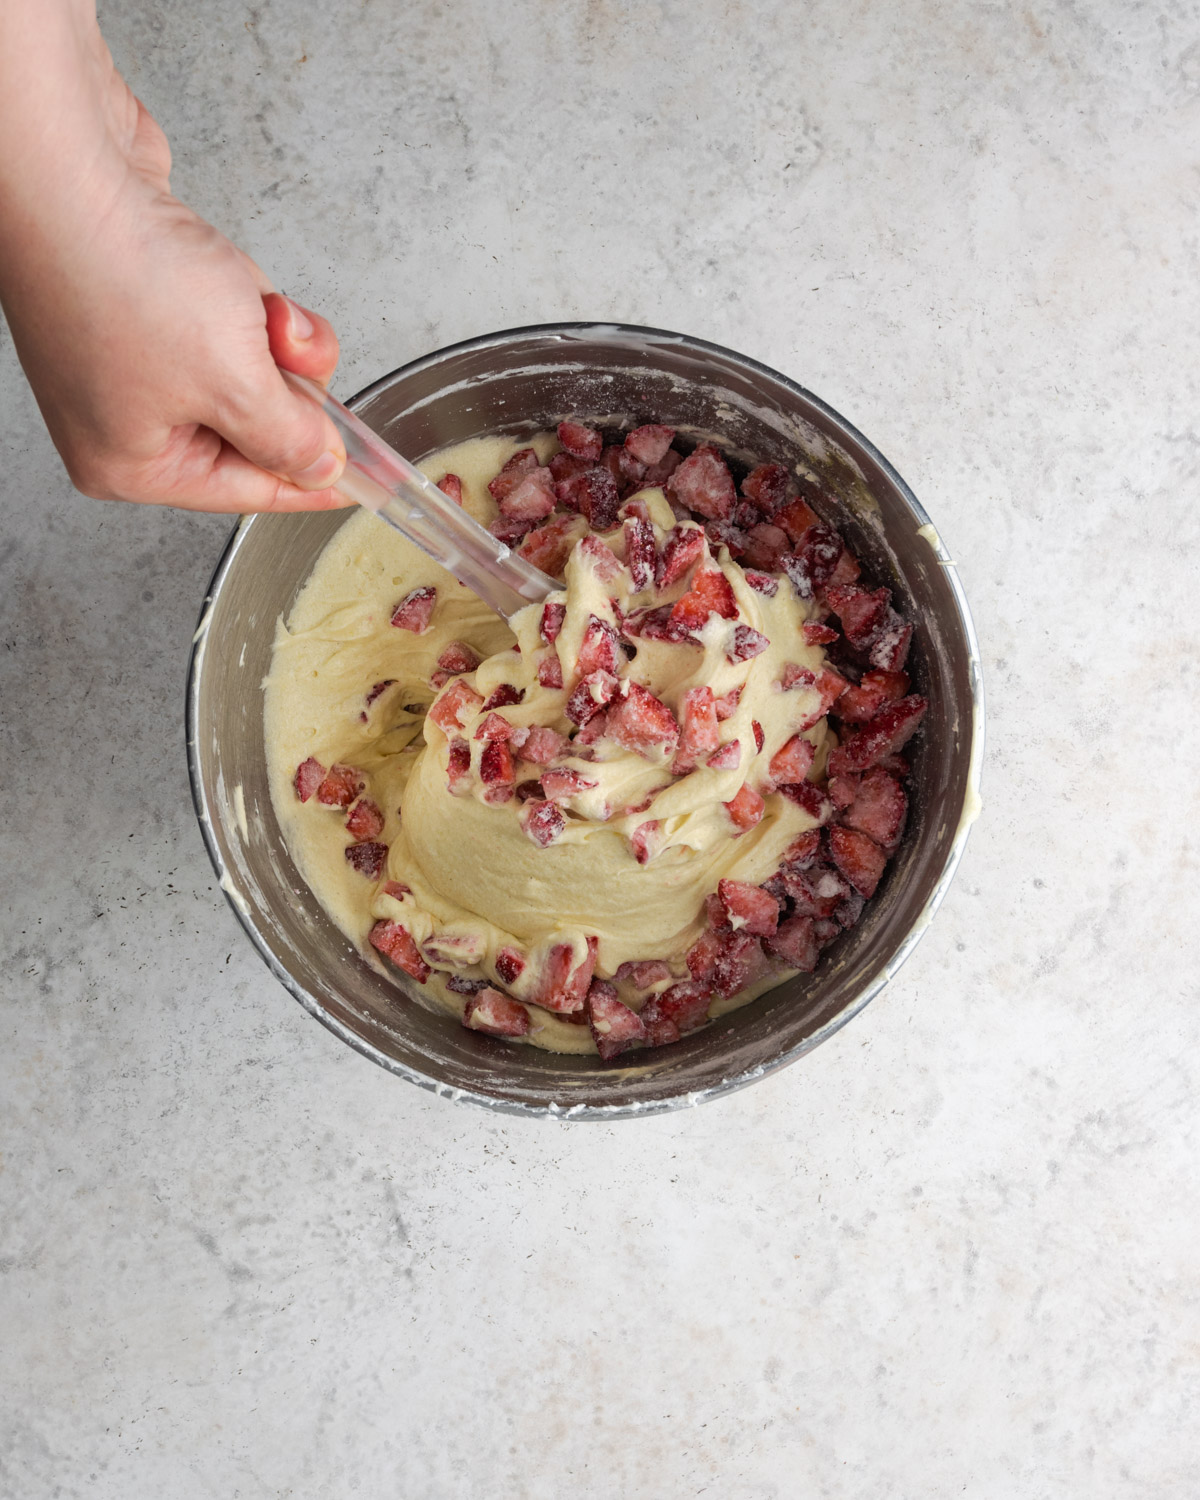 Strawberries being mixed into cake batter in a metal bowl.